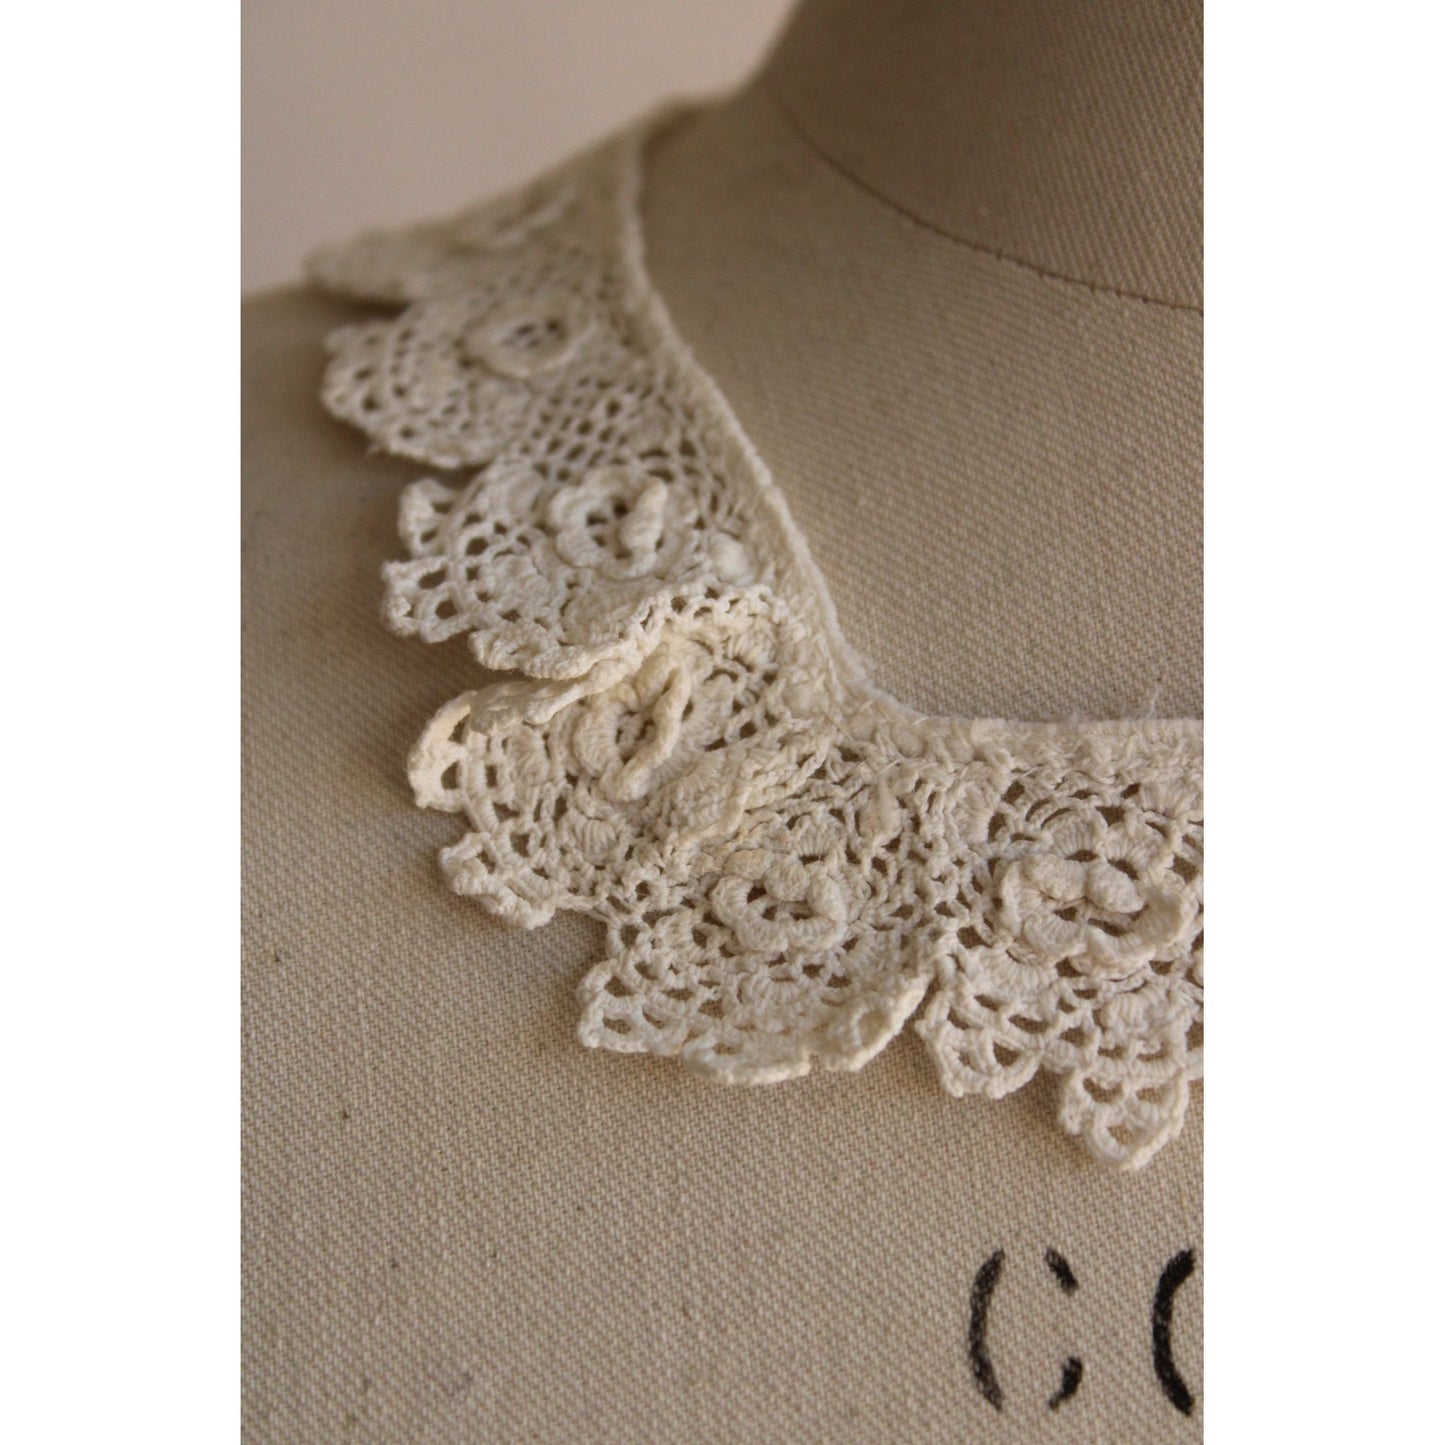 Vintage Early 1900s Collar, Cuffs and Trim in Ivory Lace